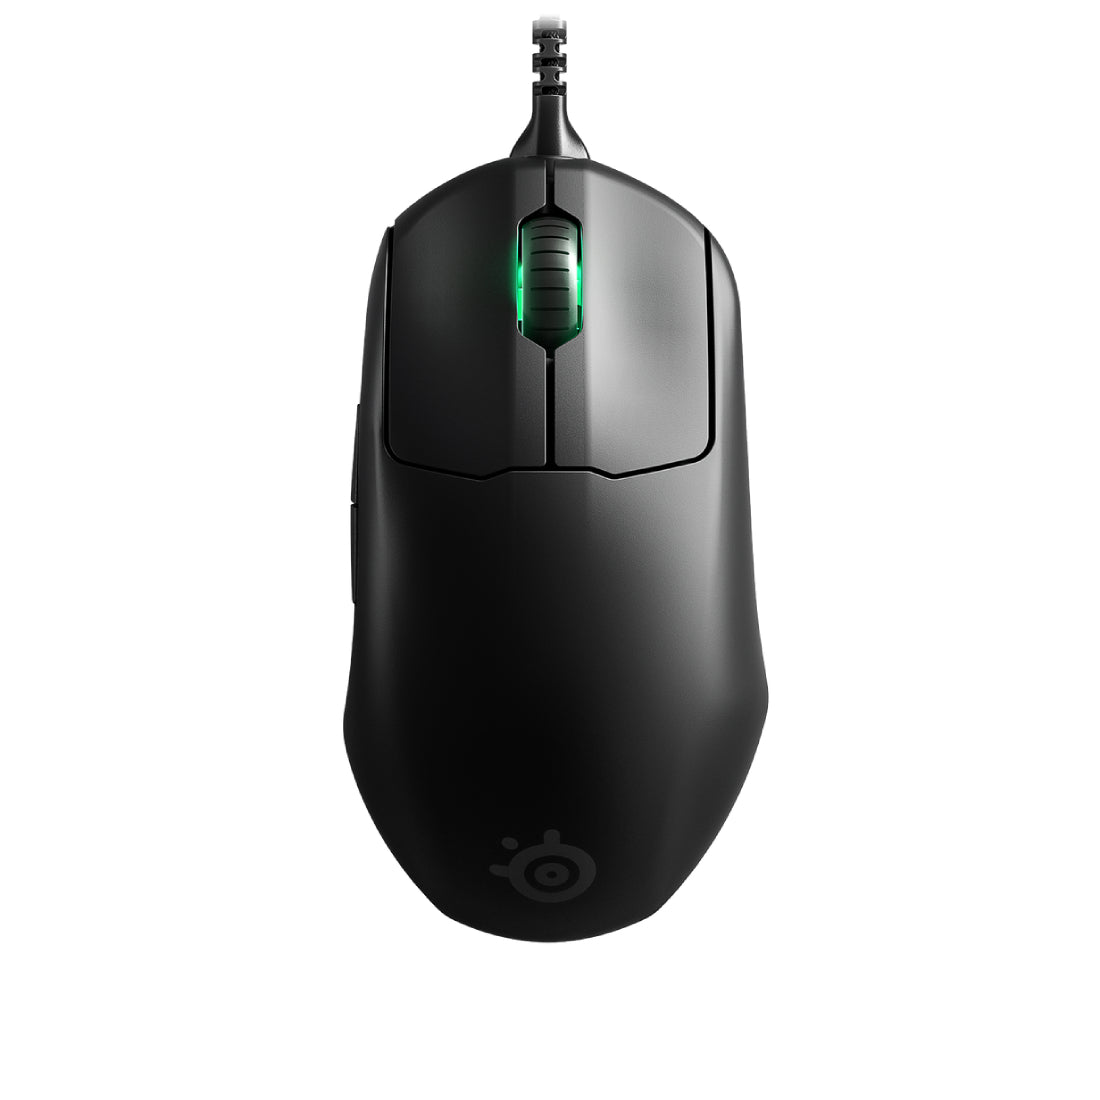 SteelSeries Prime Wired Optical Gaming Mouse w/ RGB Lighting - Black - فأرة - Store 974 | ستور ٩٧٤